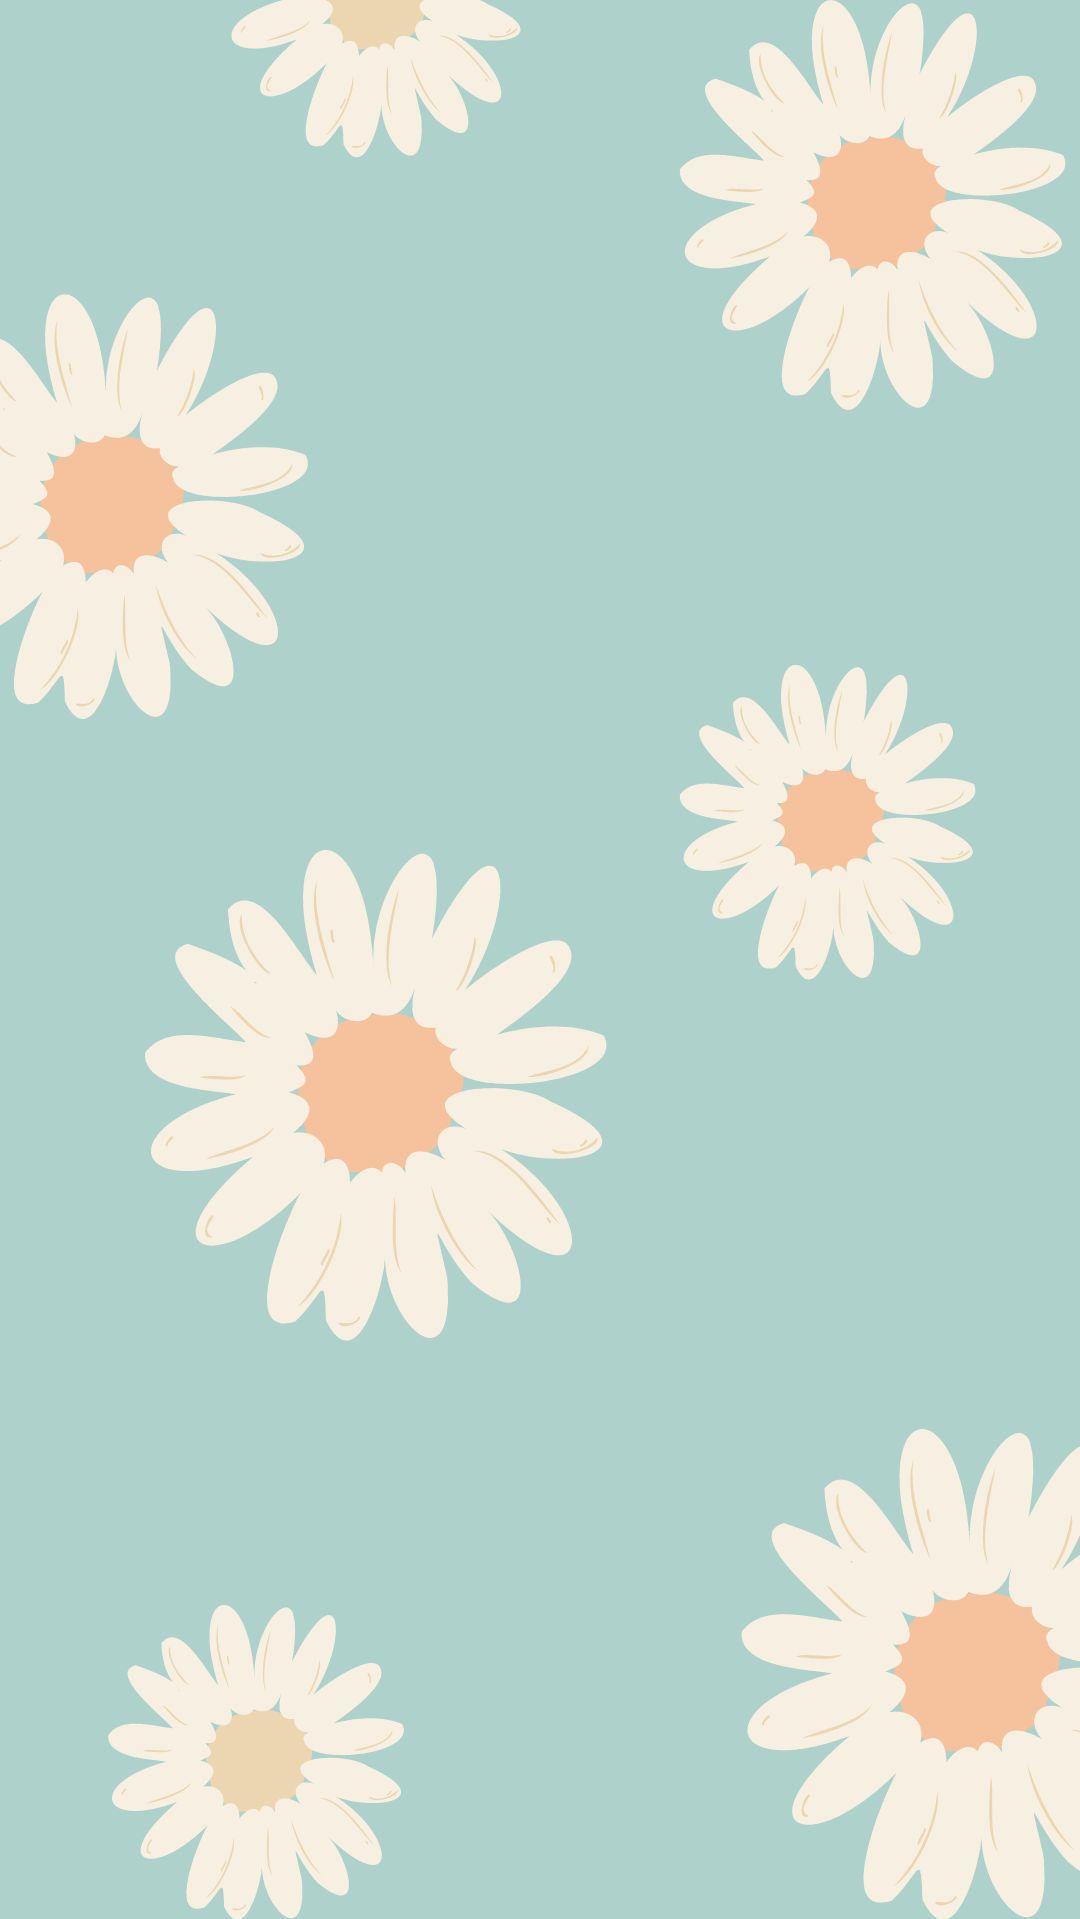 Bies Really Cute Preppy Aesthetic Wallpaper For Your Phone